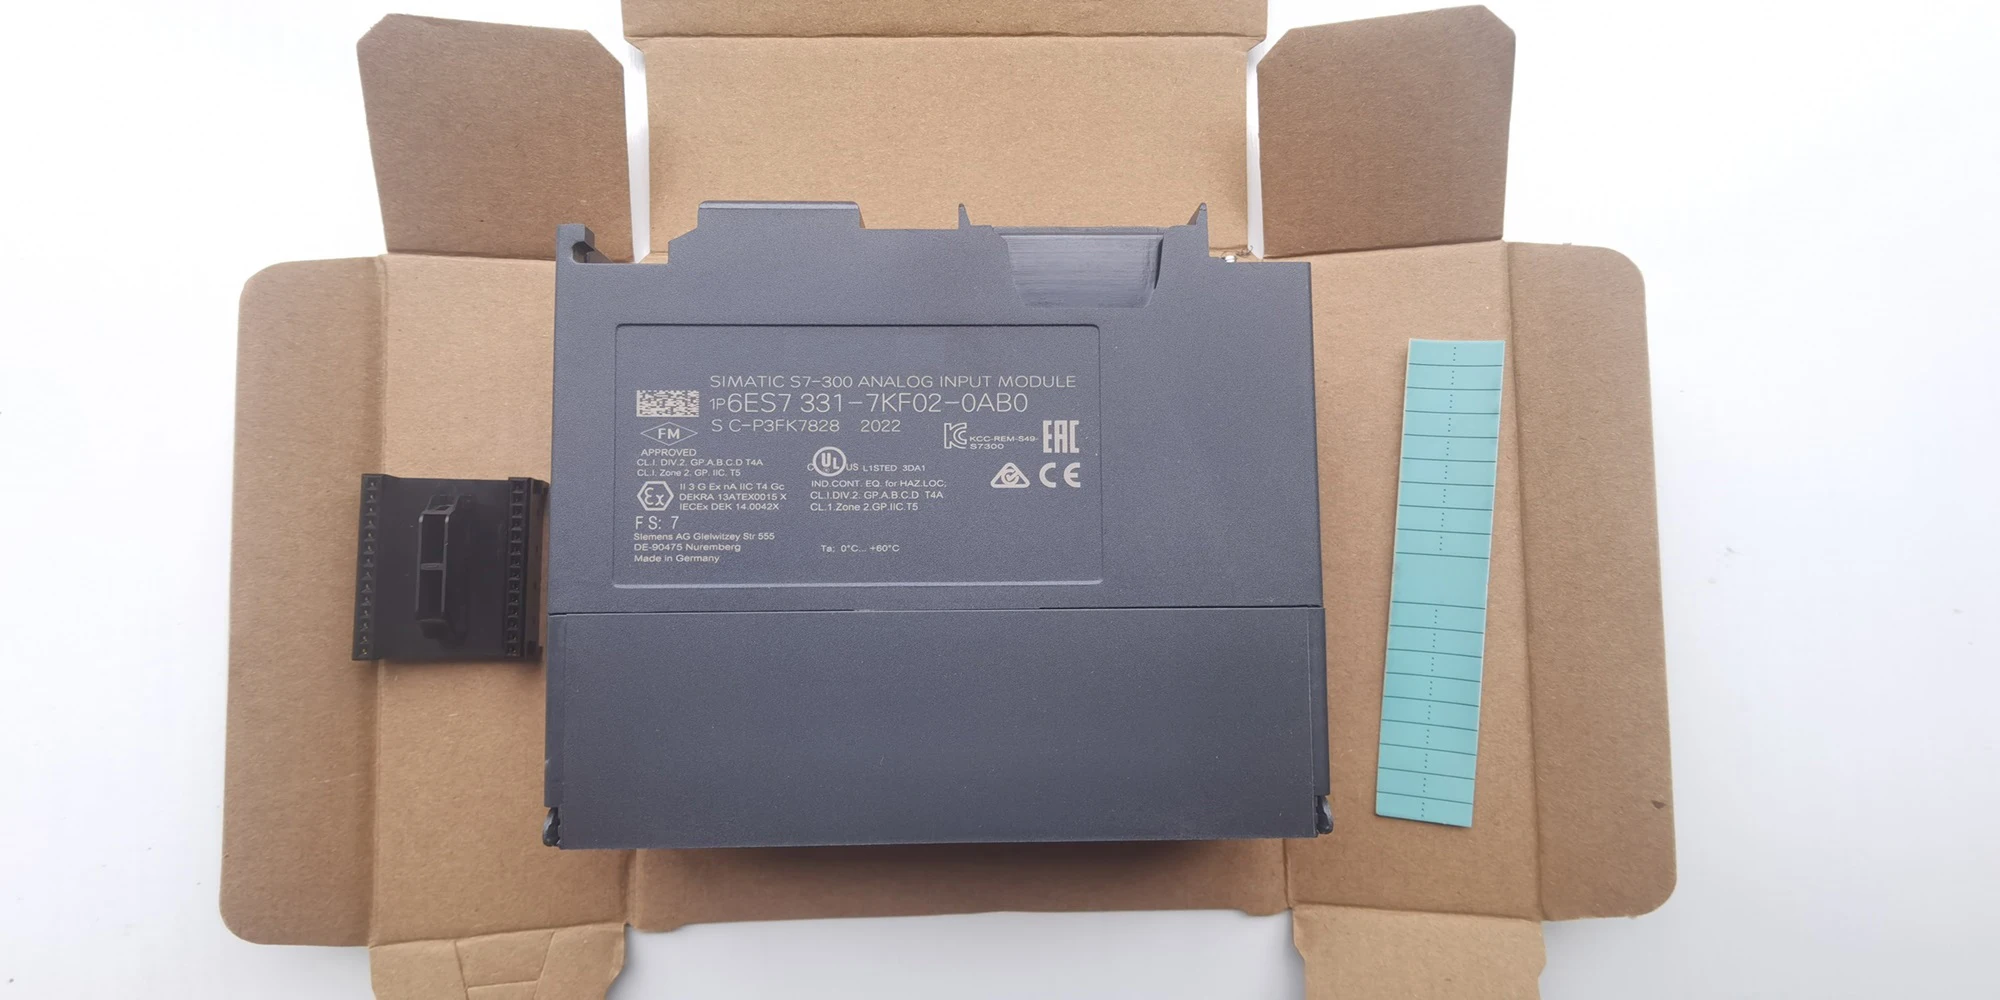 siemens New Original Brand New Original PLC Controller 6ES7 331-7PF01-0AB0 S7-300 Digital Input Moudle Fast Delivery